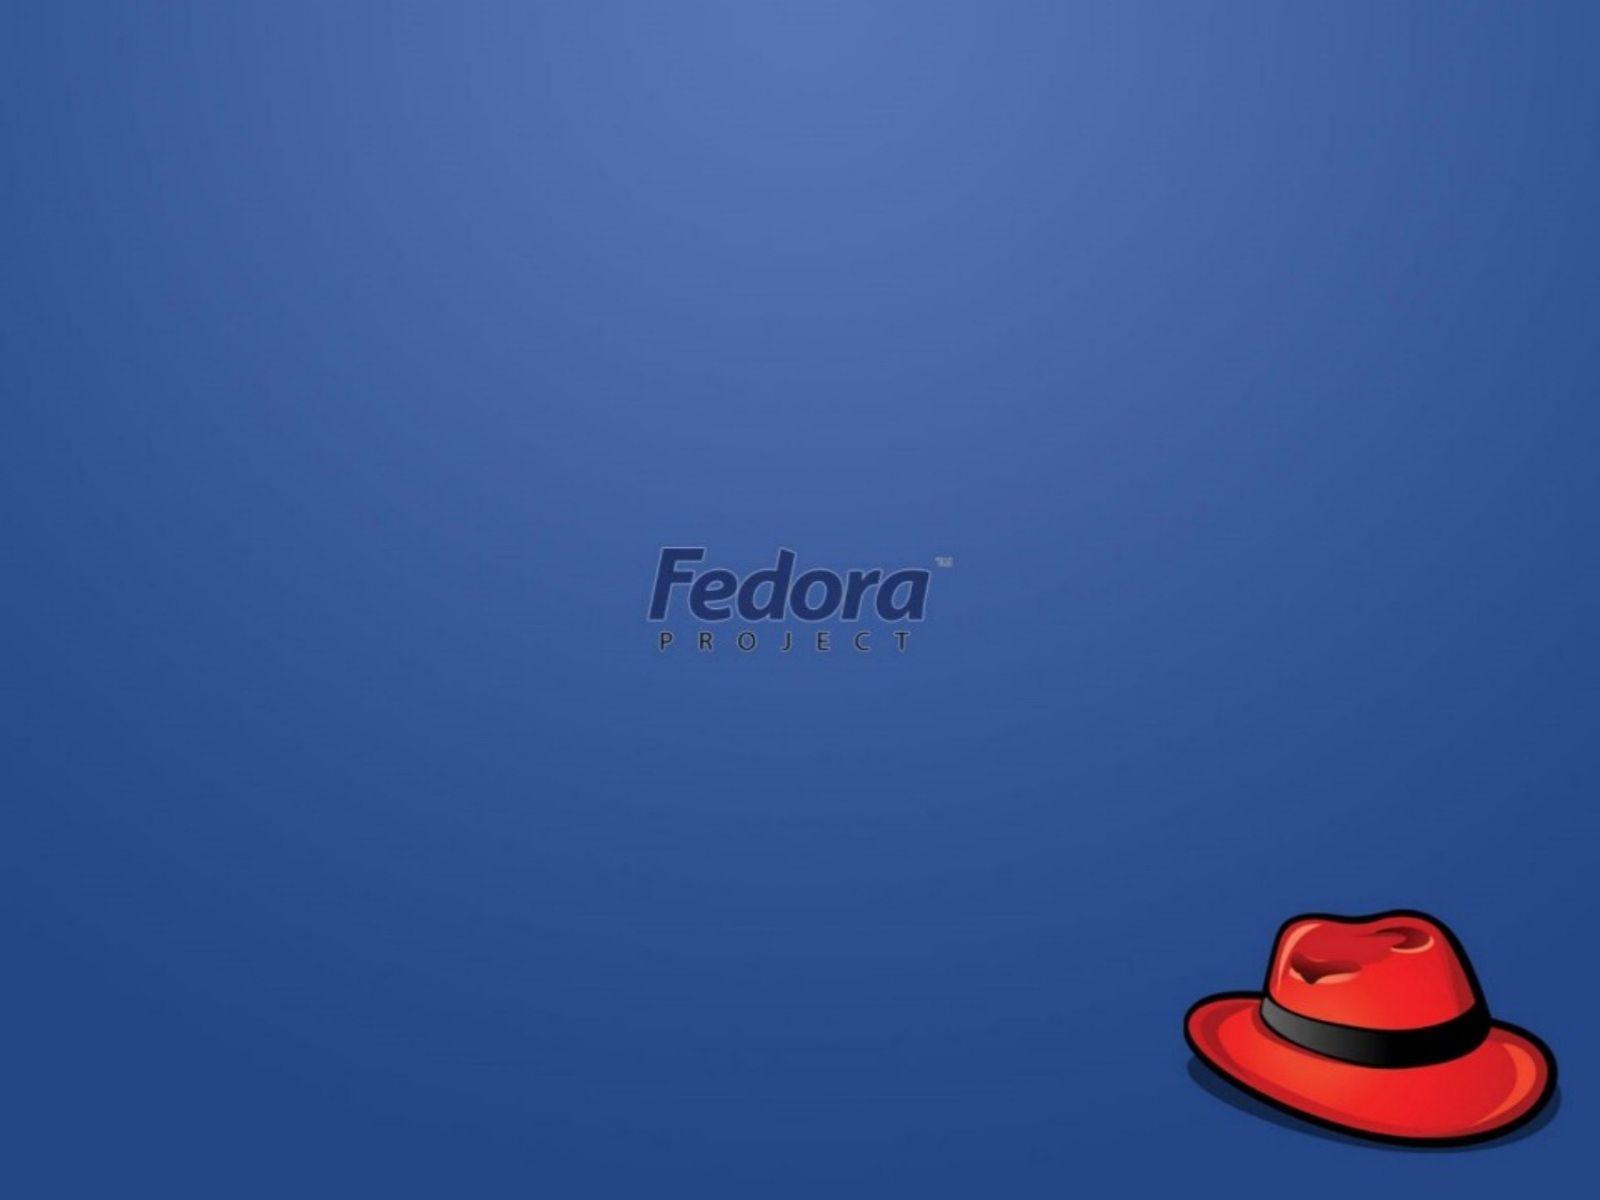 Fedora Red Hat Wallpaper Linux Picture Fedora Project